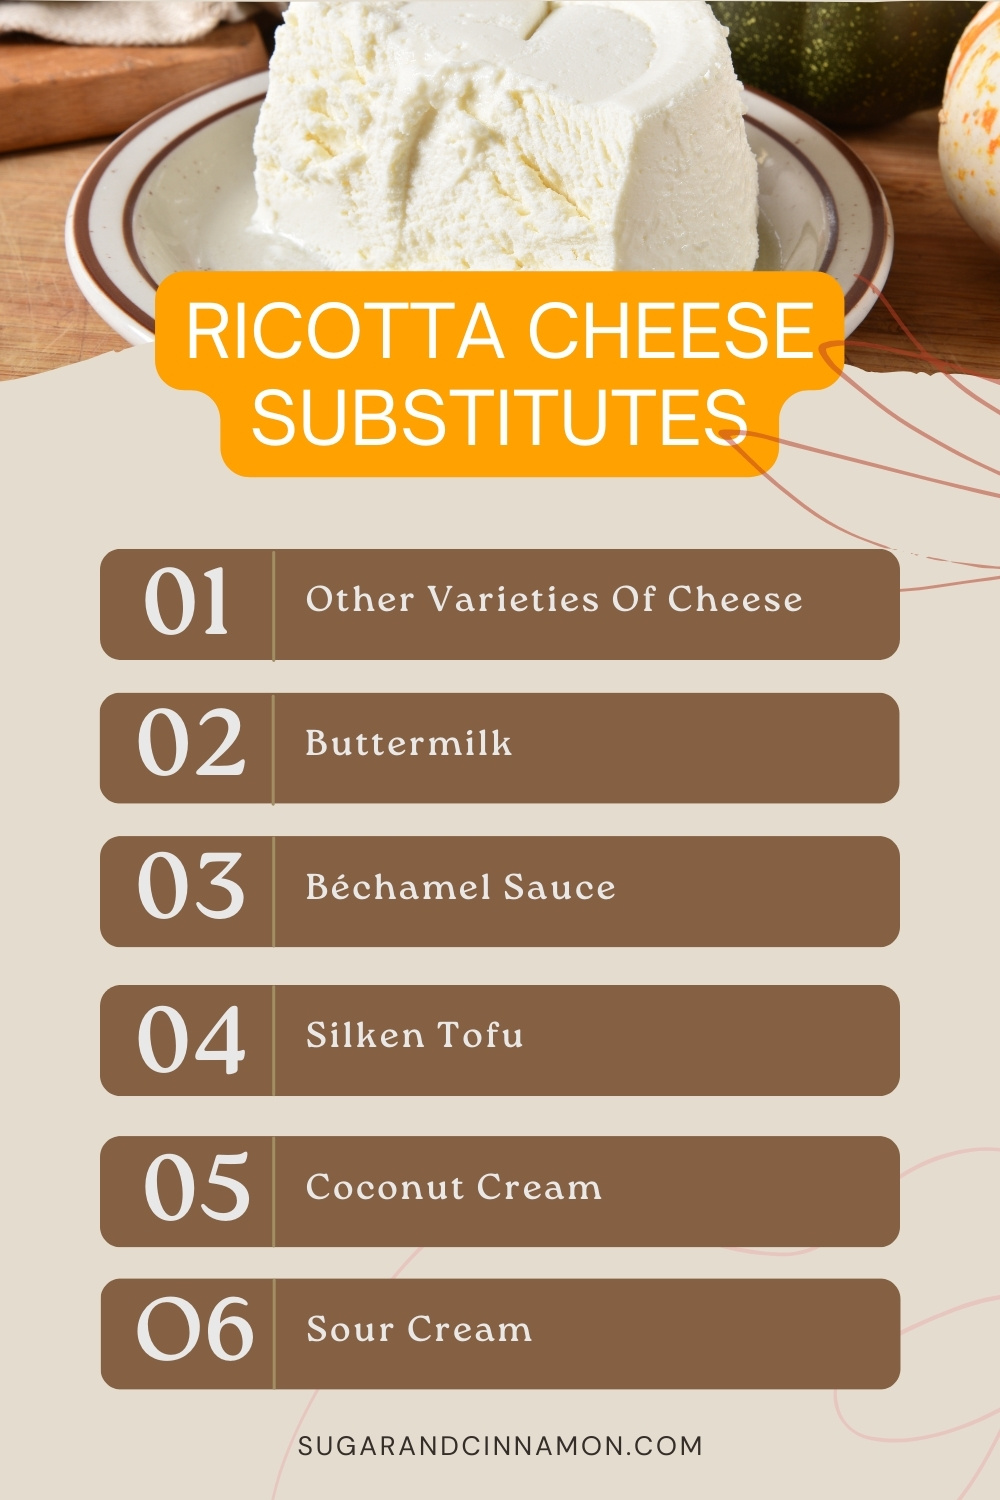 Ricotta Cheese Substitutes For Baking